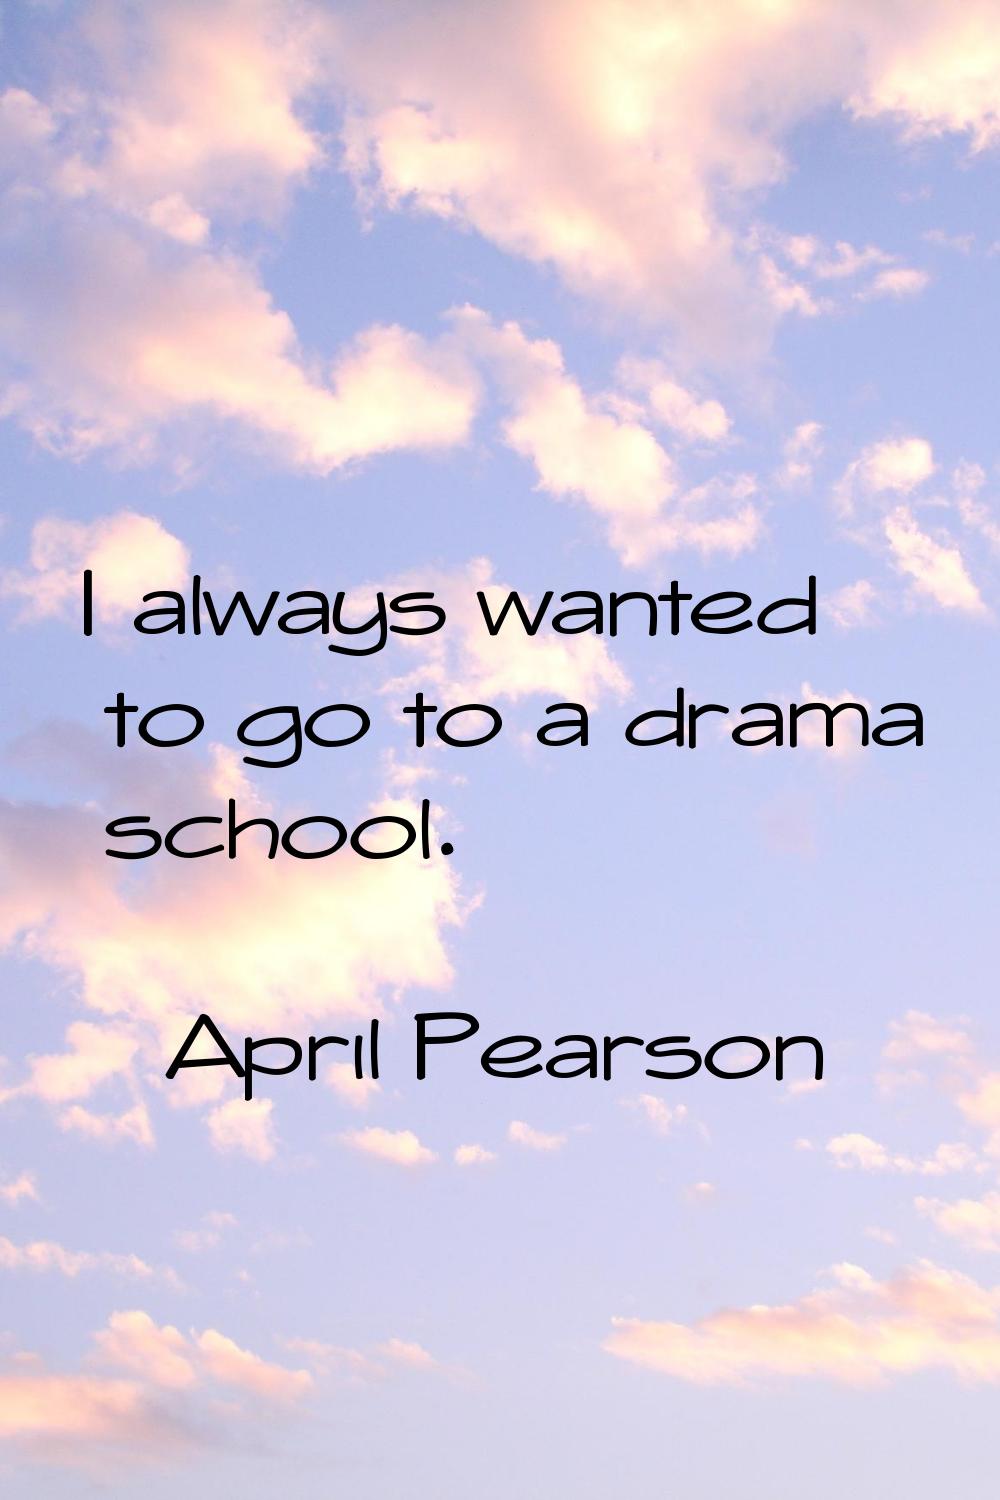 I always wanted to go to a drama school.